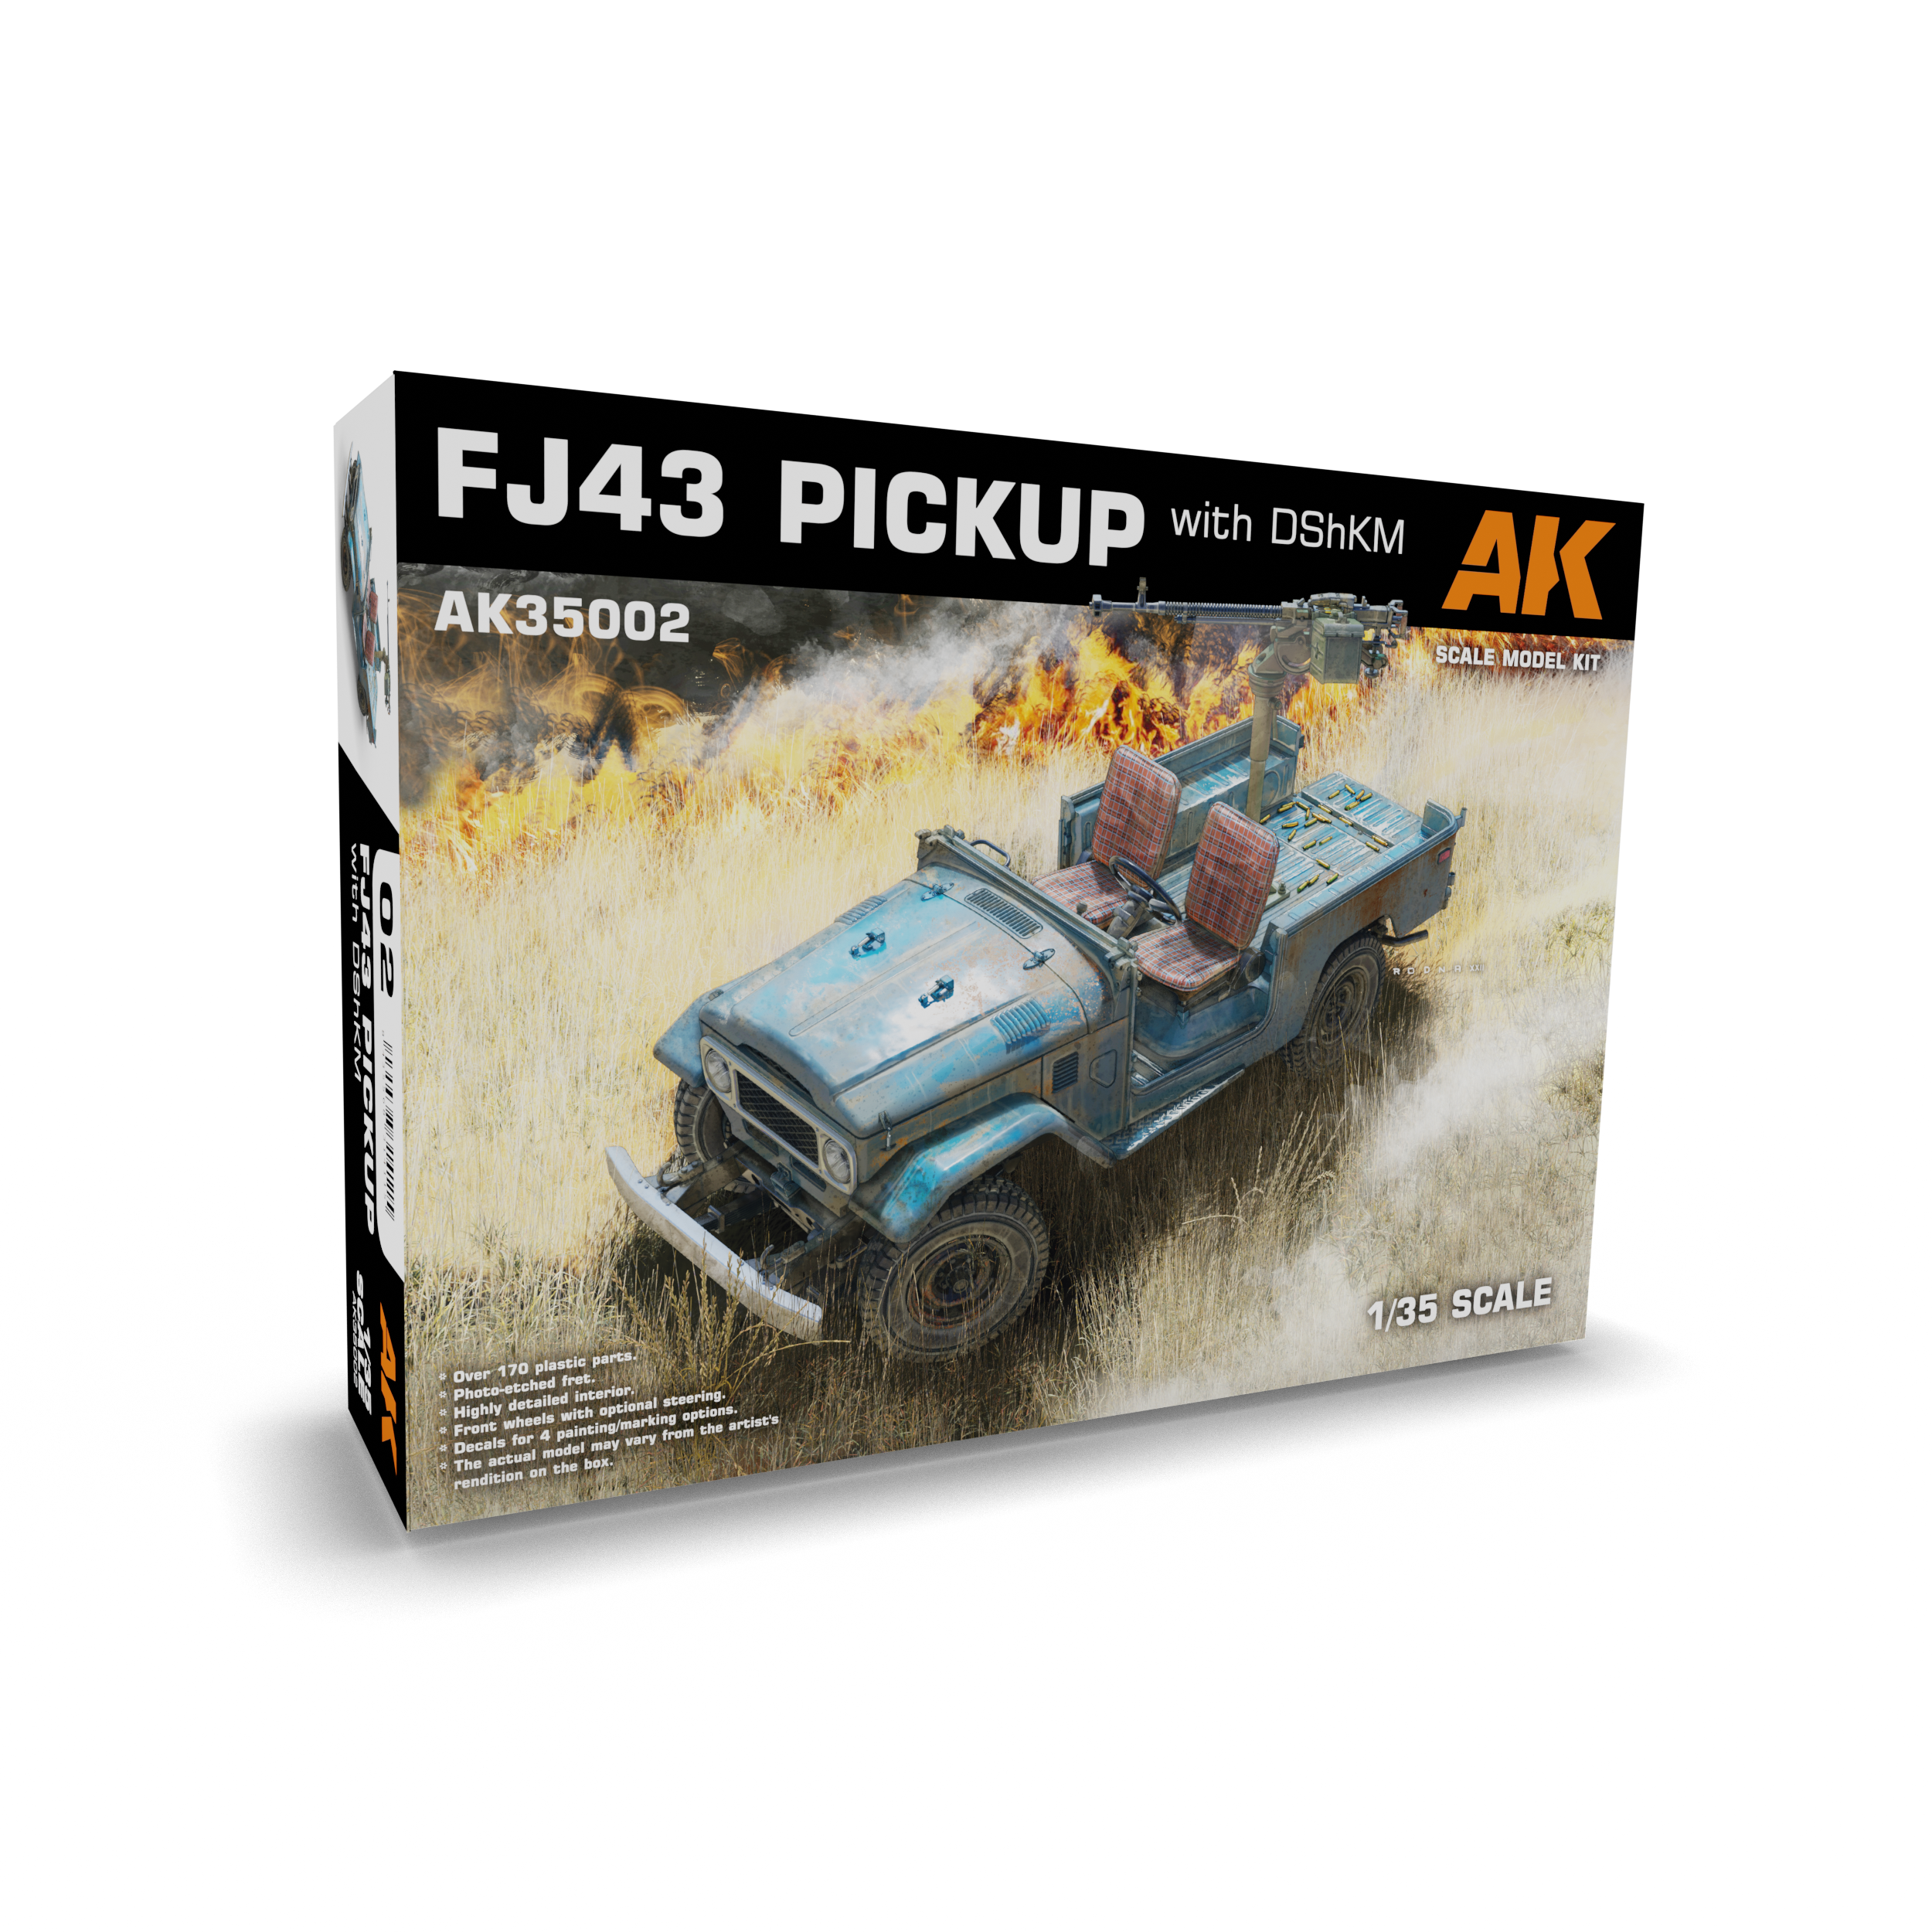 FJ43 Pickup with DShKM 1/35 Scale - Loaded Dice Barry Vale of Glamorgan CF64 3HD